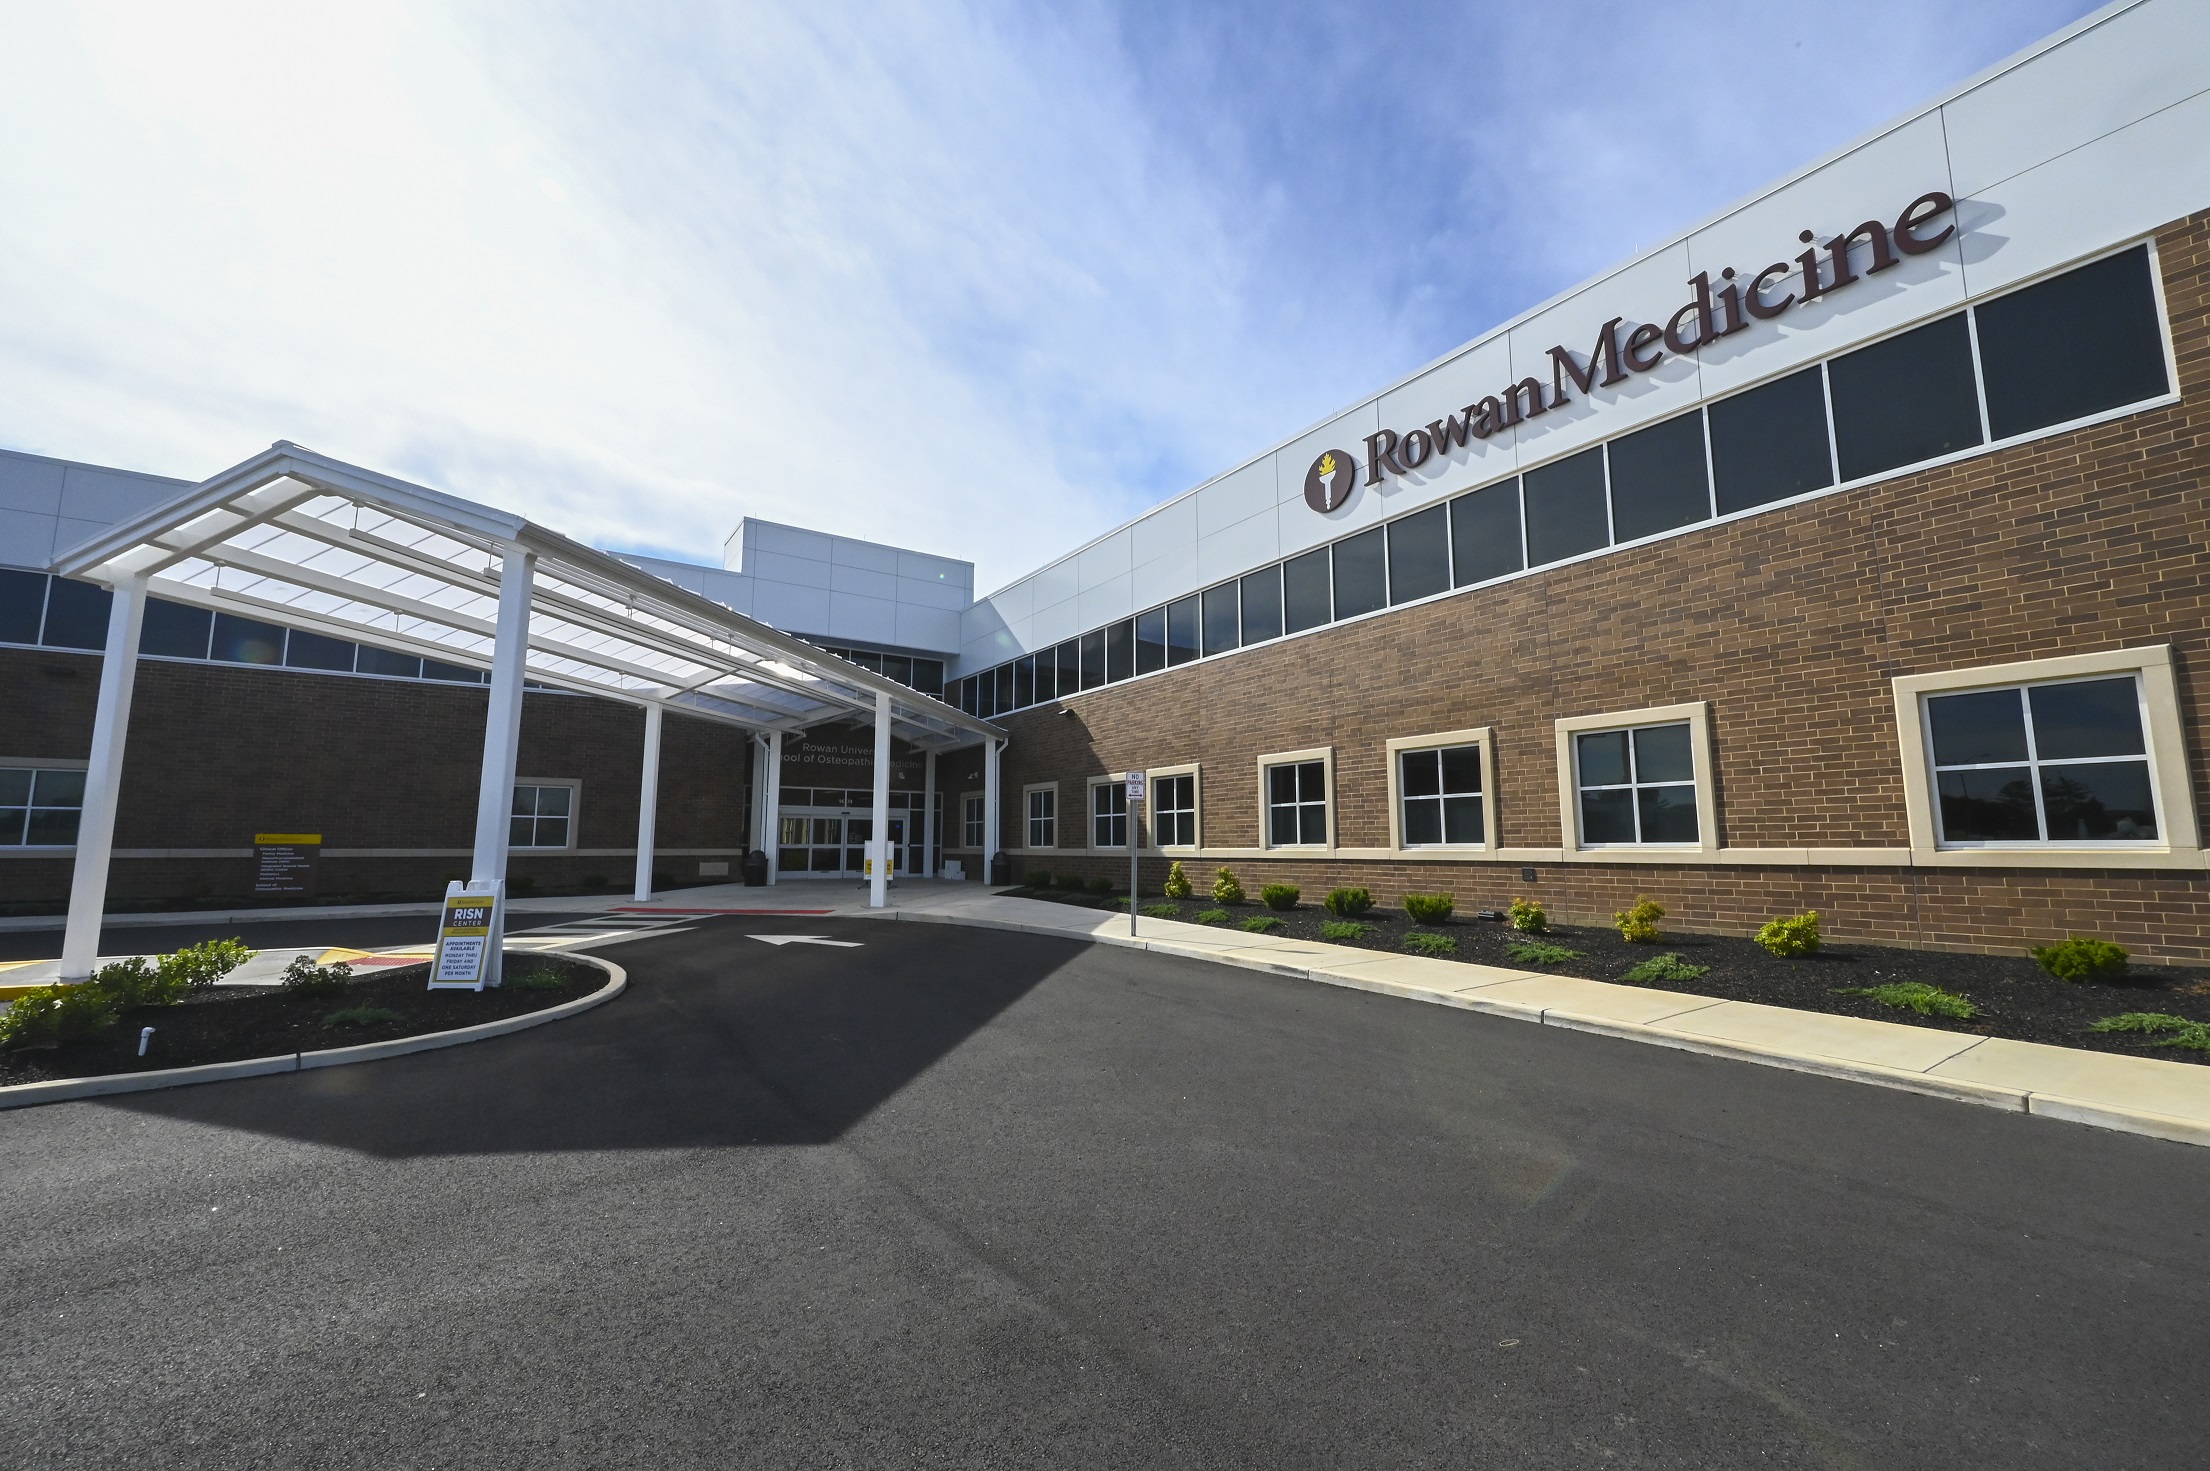 This is an exterior photo of Rowan Medicine in Sewell, N.J. It depicts the entrance to a brick two-story building with a frosted-glass awning shading the entrance and a circular driveway.